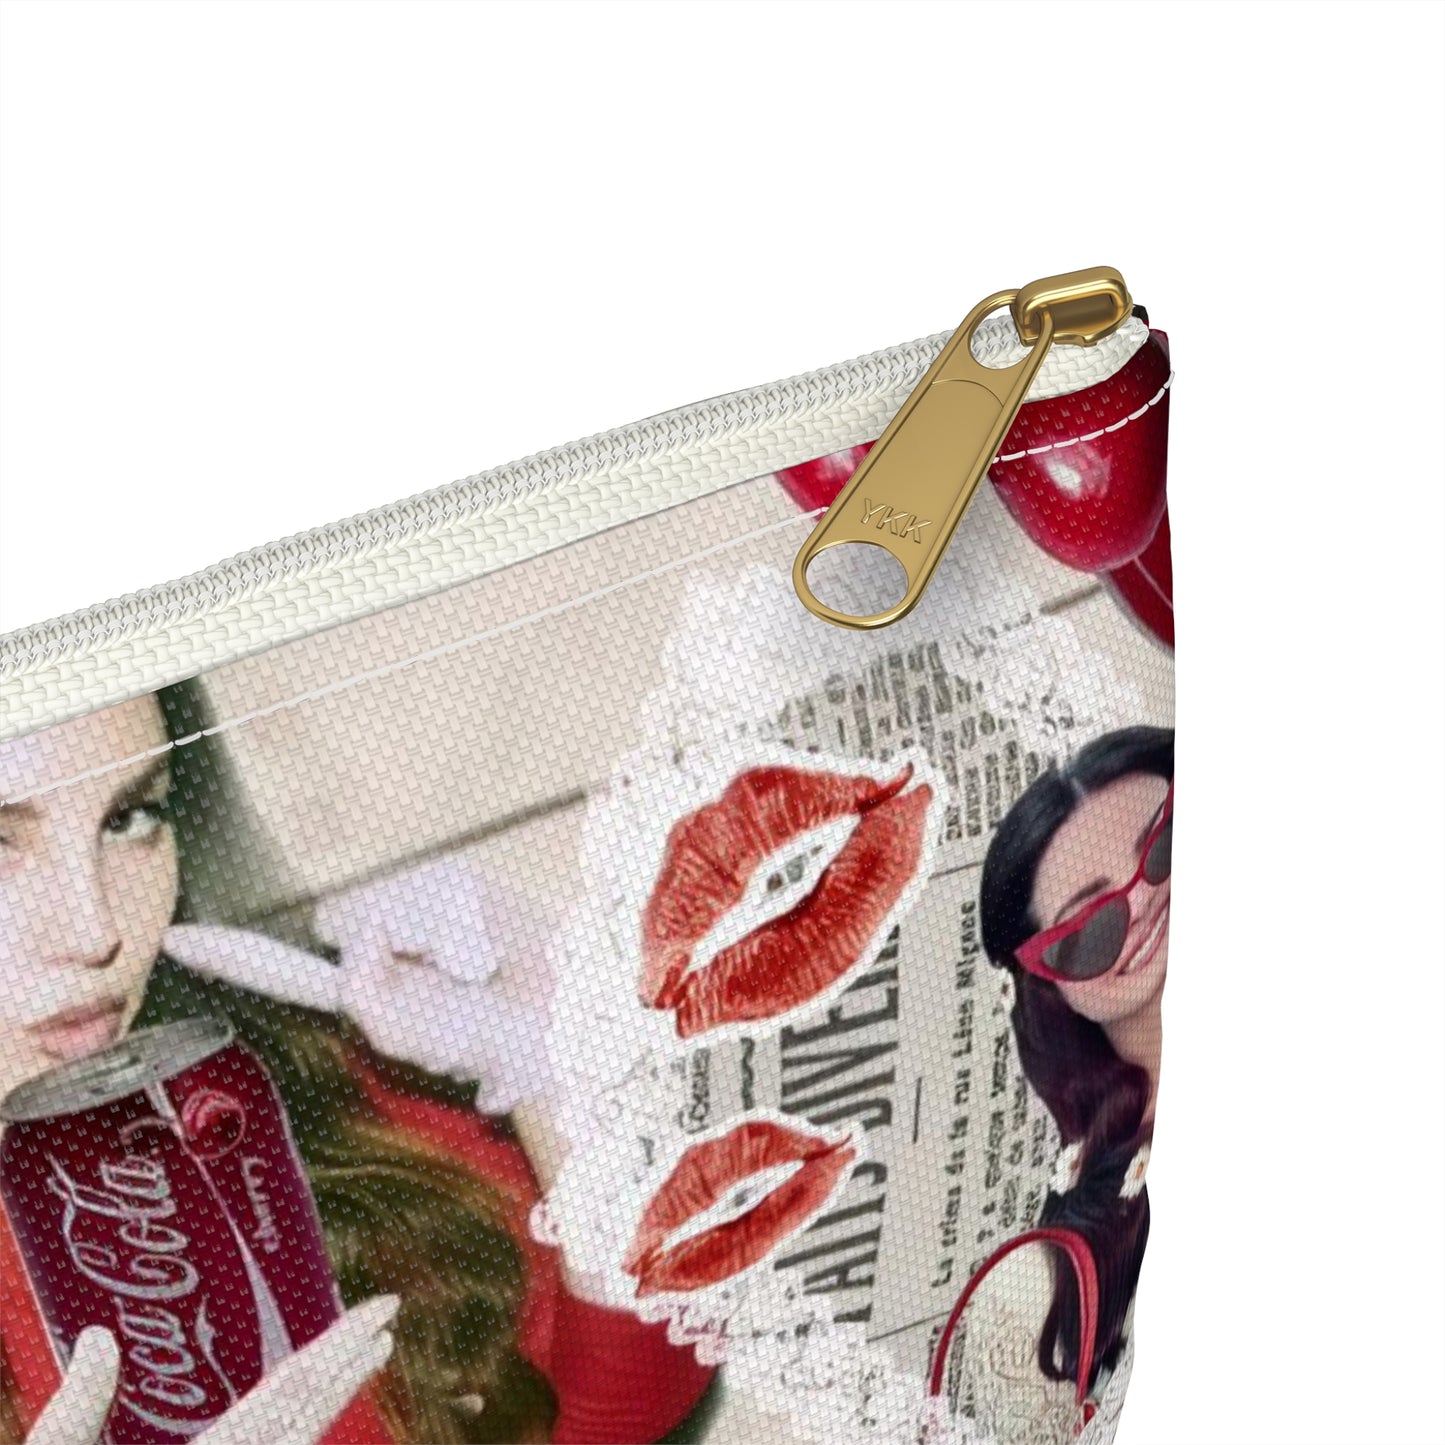 Lana Del Rey Cherry Coke Collage Accesory Pouch